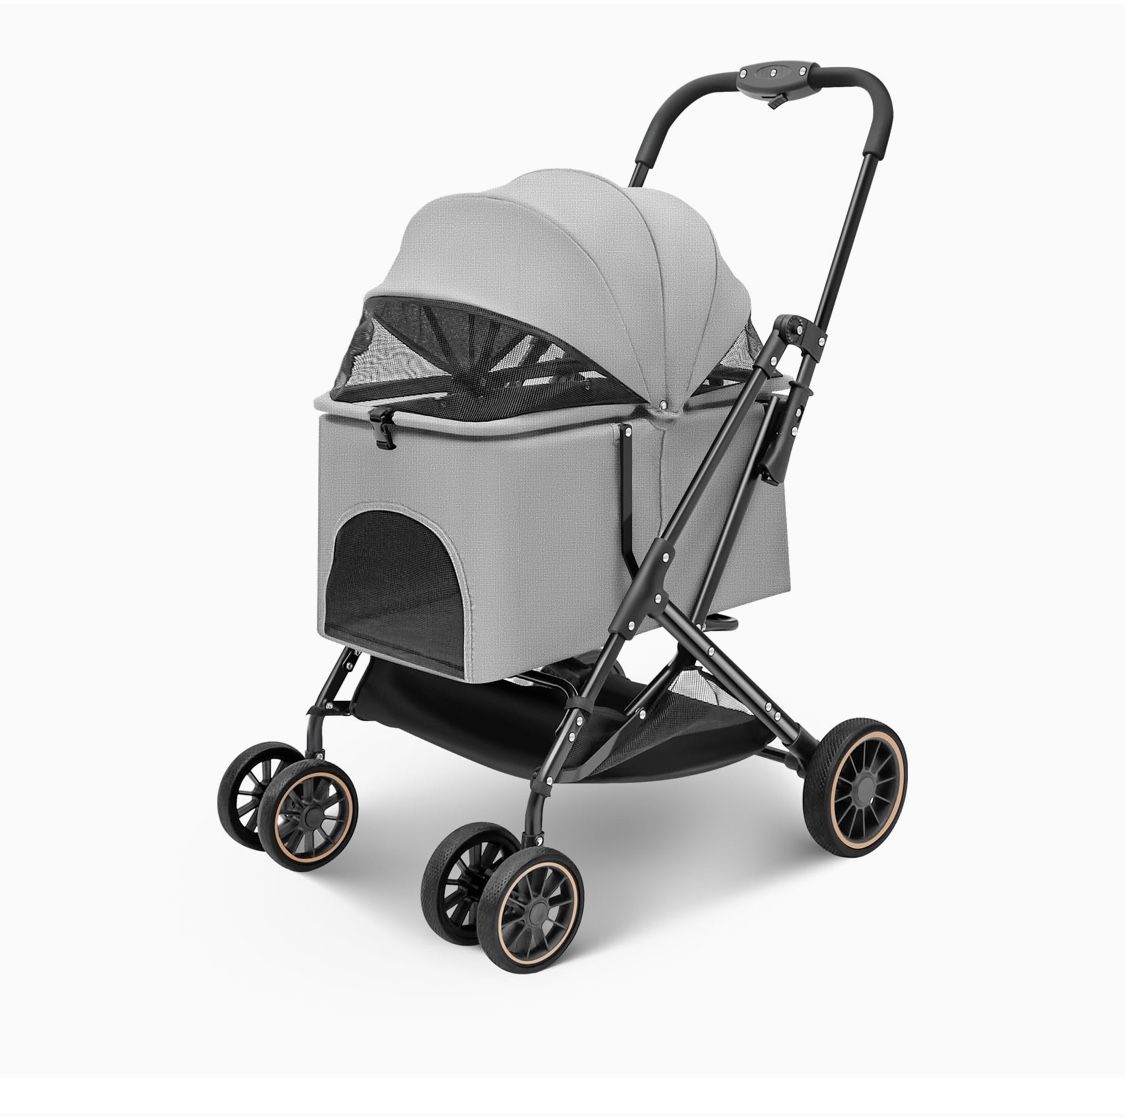 Dog Stroller with Durable Shock-Absorbing PU Wheels, Scratch Waterproof Fabric, One-Handed Folding, No Zipper, Dual Entry Ventilated Design(Grey)